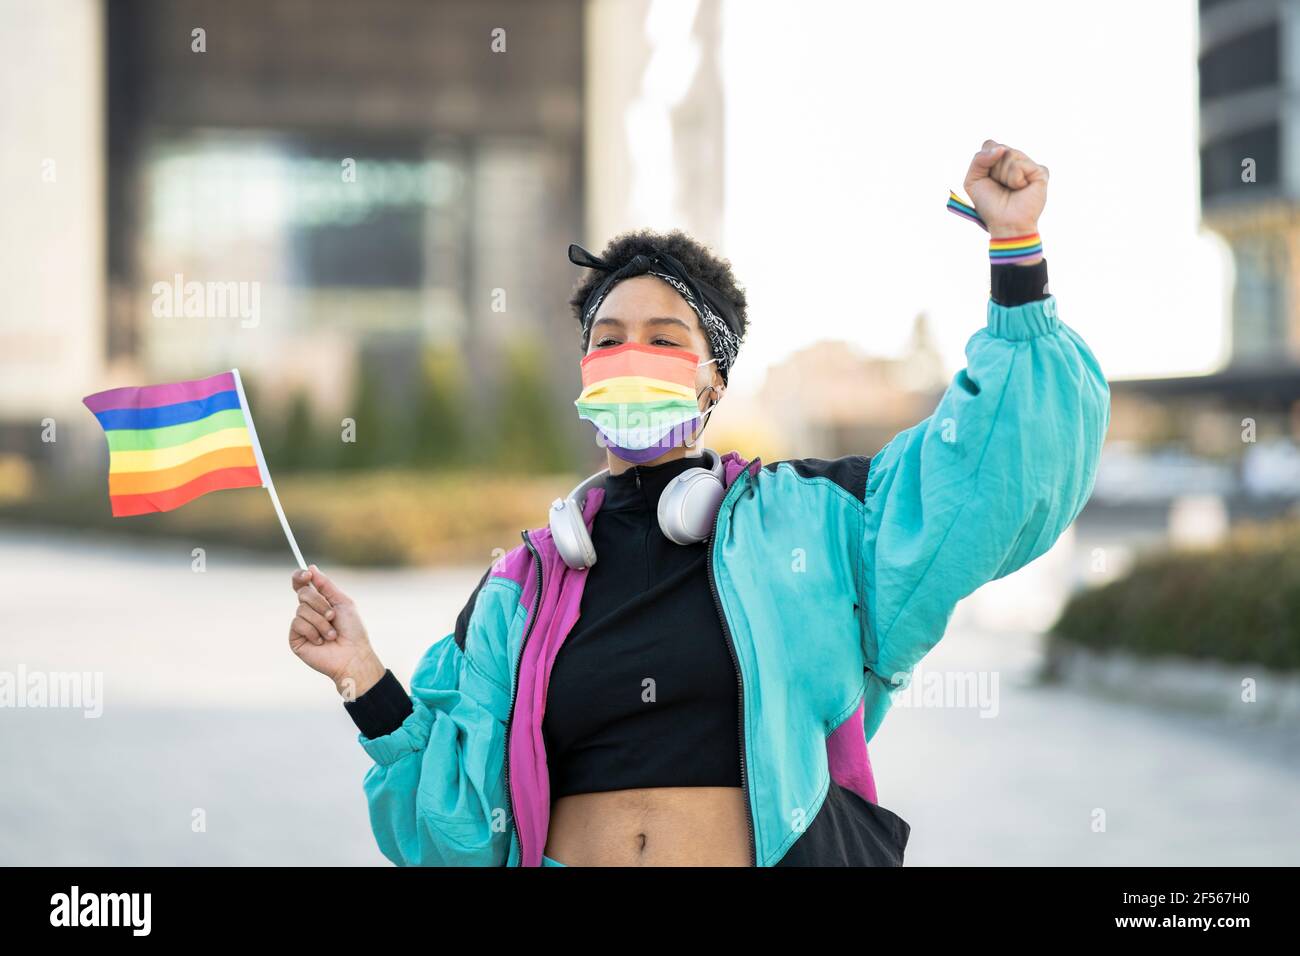 Young woman protesting for LGBTQIA rights in city during COVID-19 Stock Photo